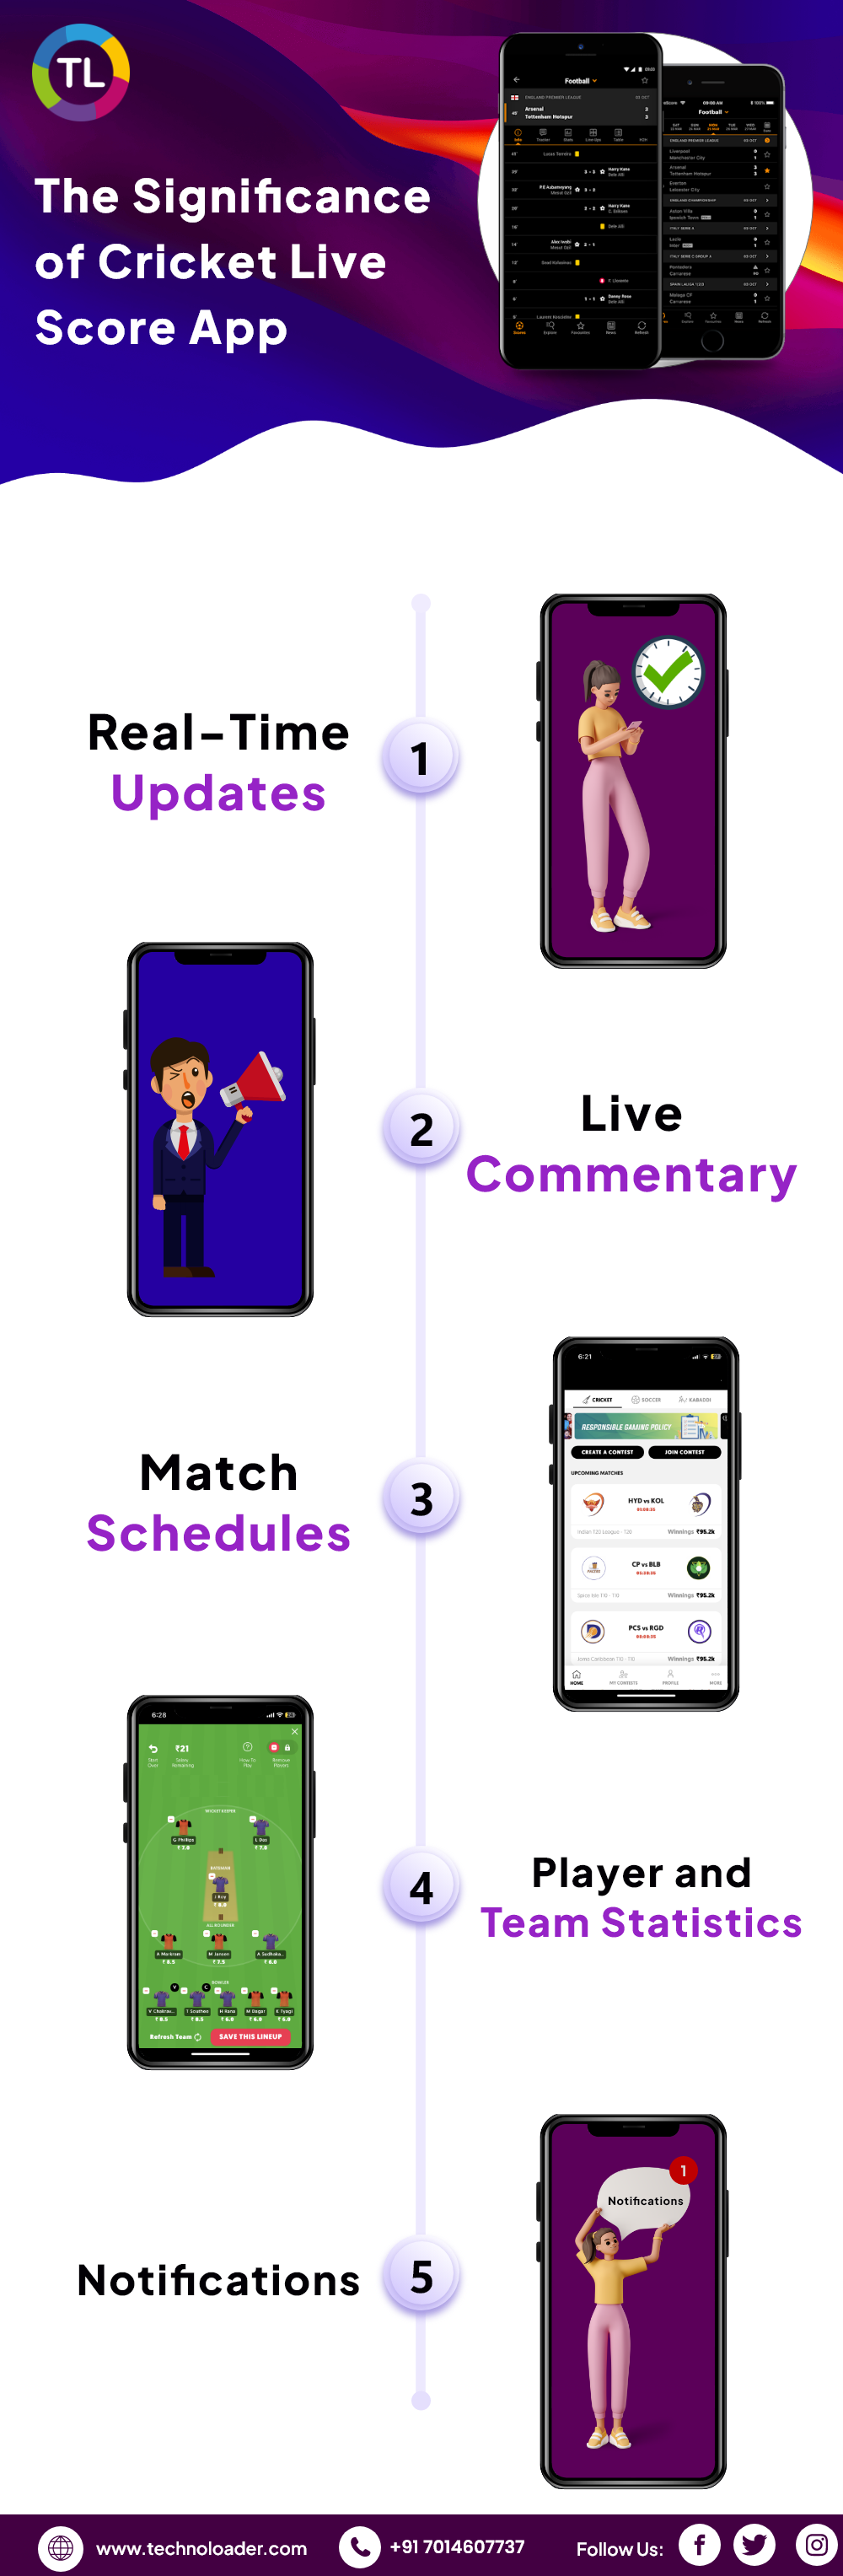 Significance and benefits of Cricket Live Score App 